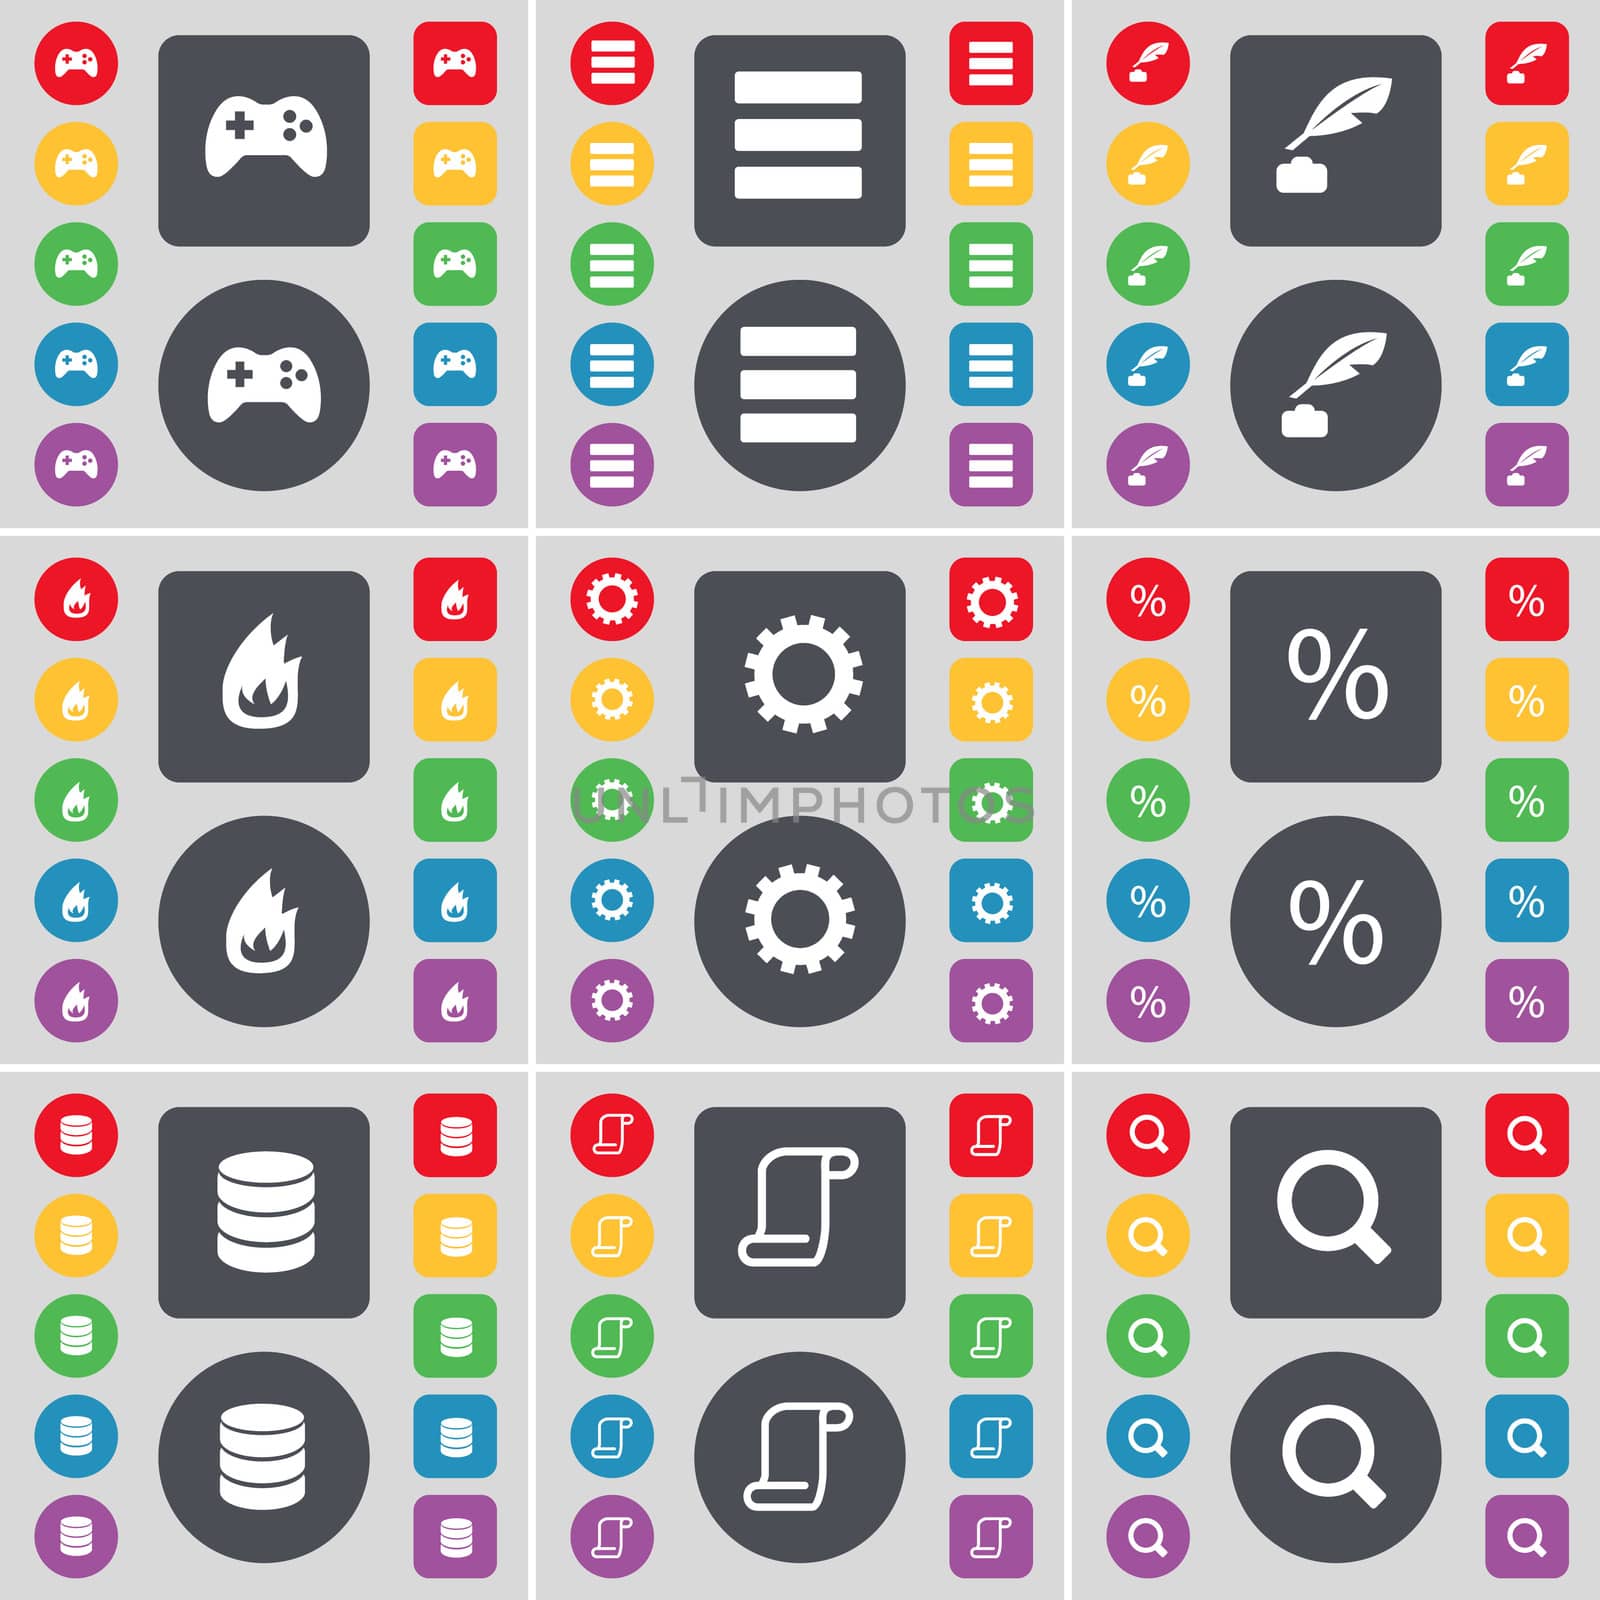 Gamepad, Apps, Ink pen, Fire, Gear, Percent, Database, Scroll, Magnifying glass icon symbol. A large set of flat, colored buttons for your design. illustration